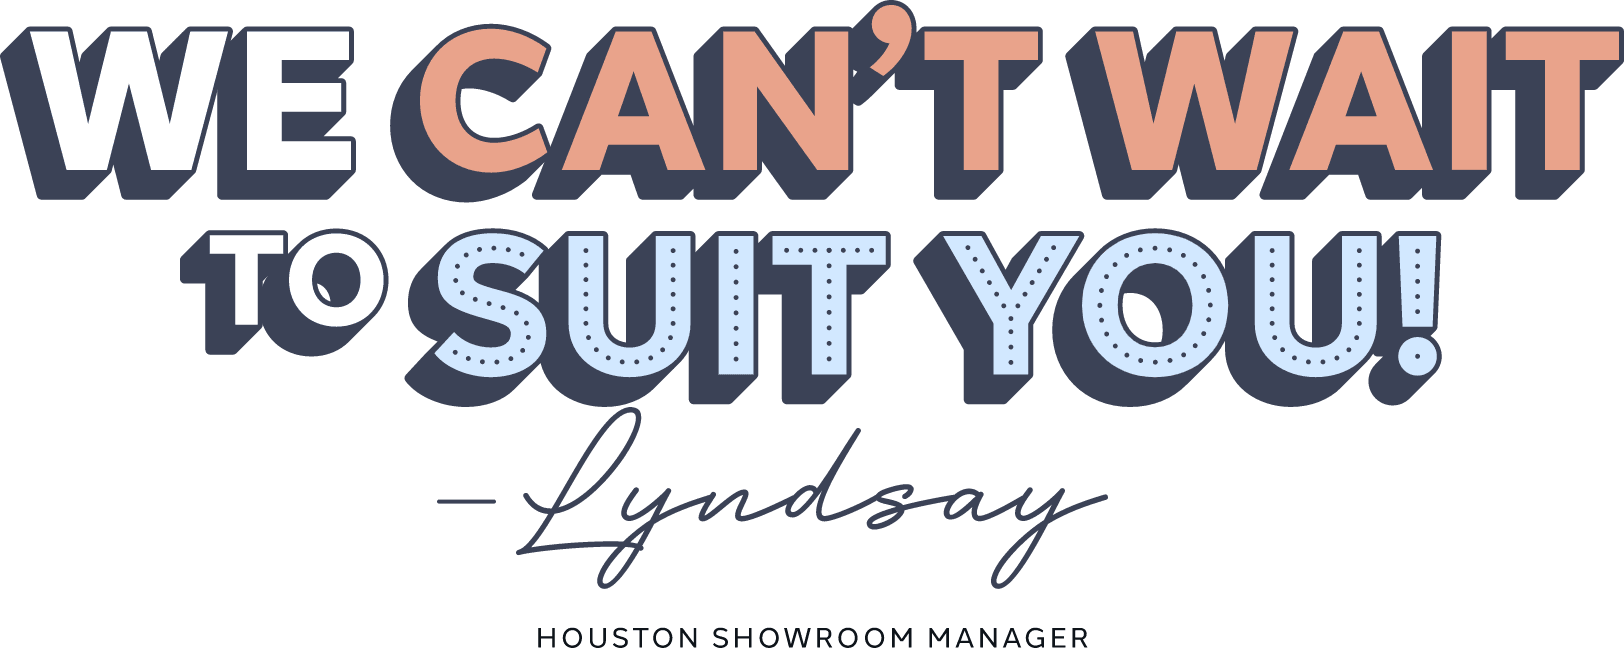 Colorful typography reading “We can't wait to suit you.” from Lyndsay, Houston suit store manager.